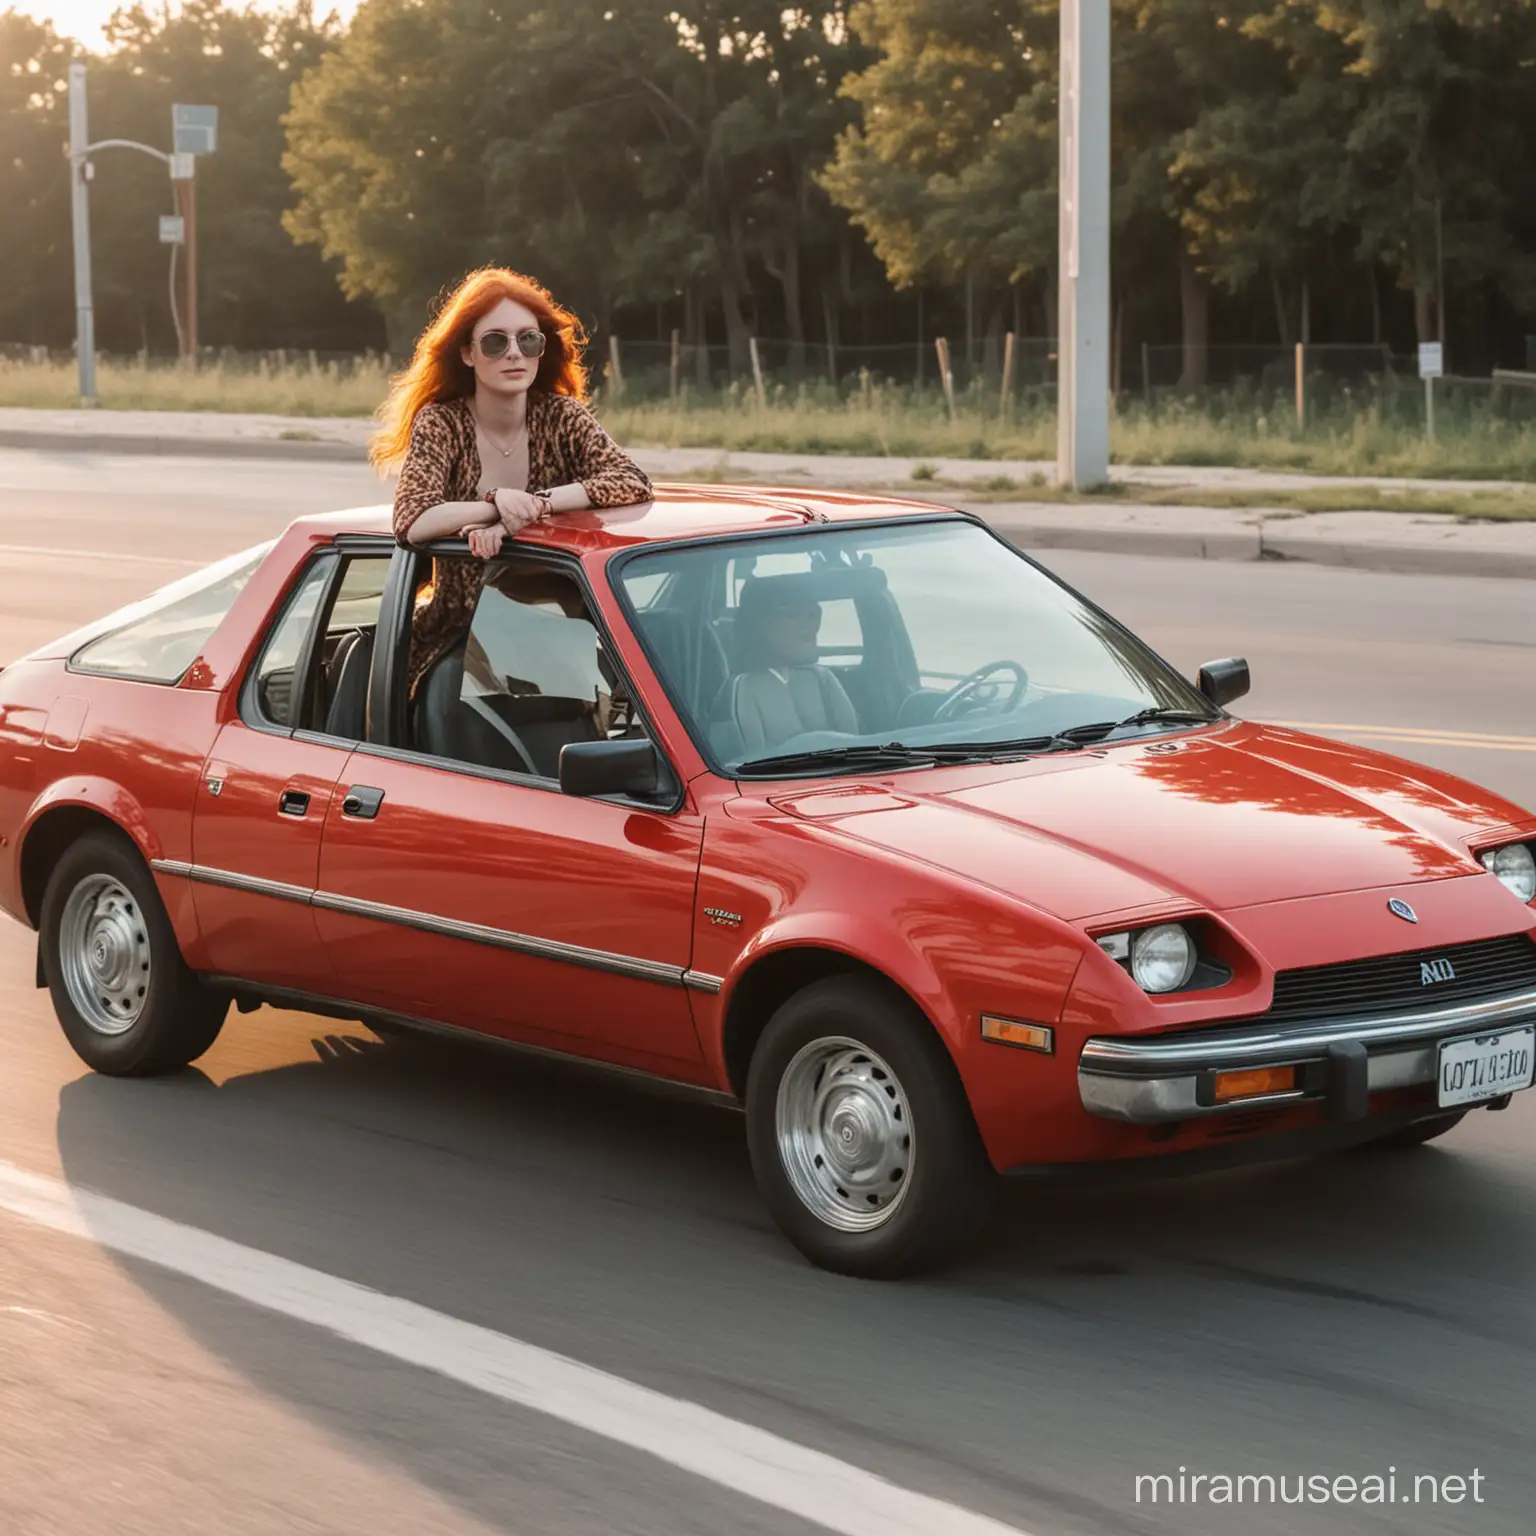 redhead driving in an amc pacer